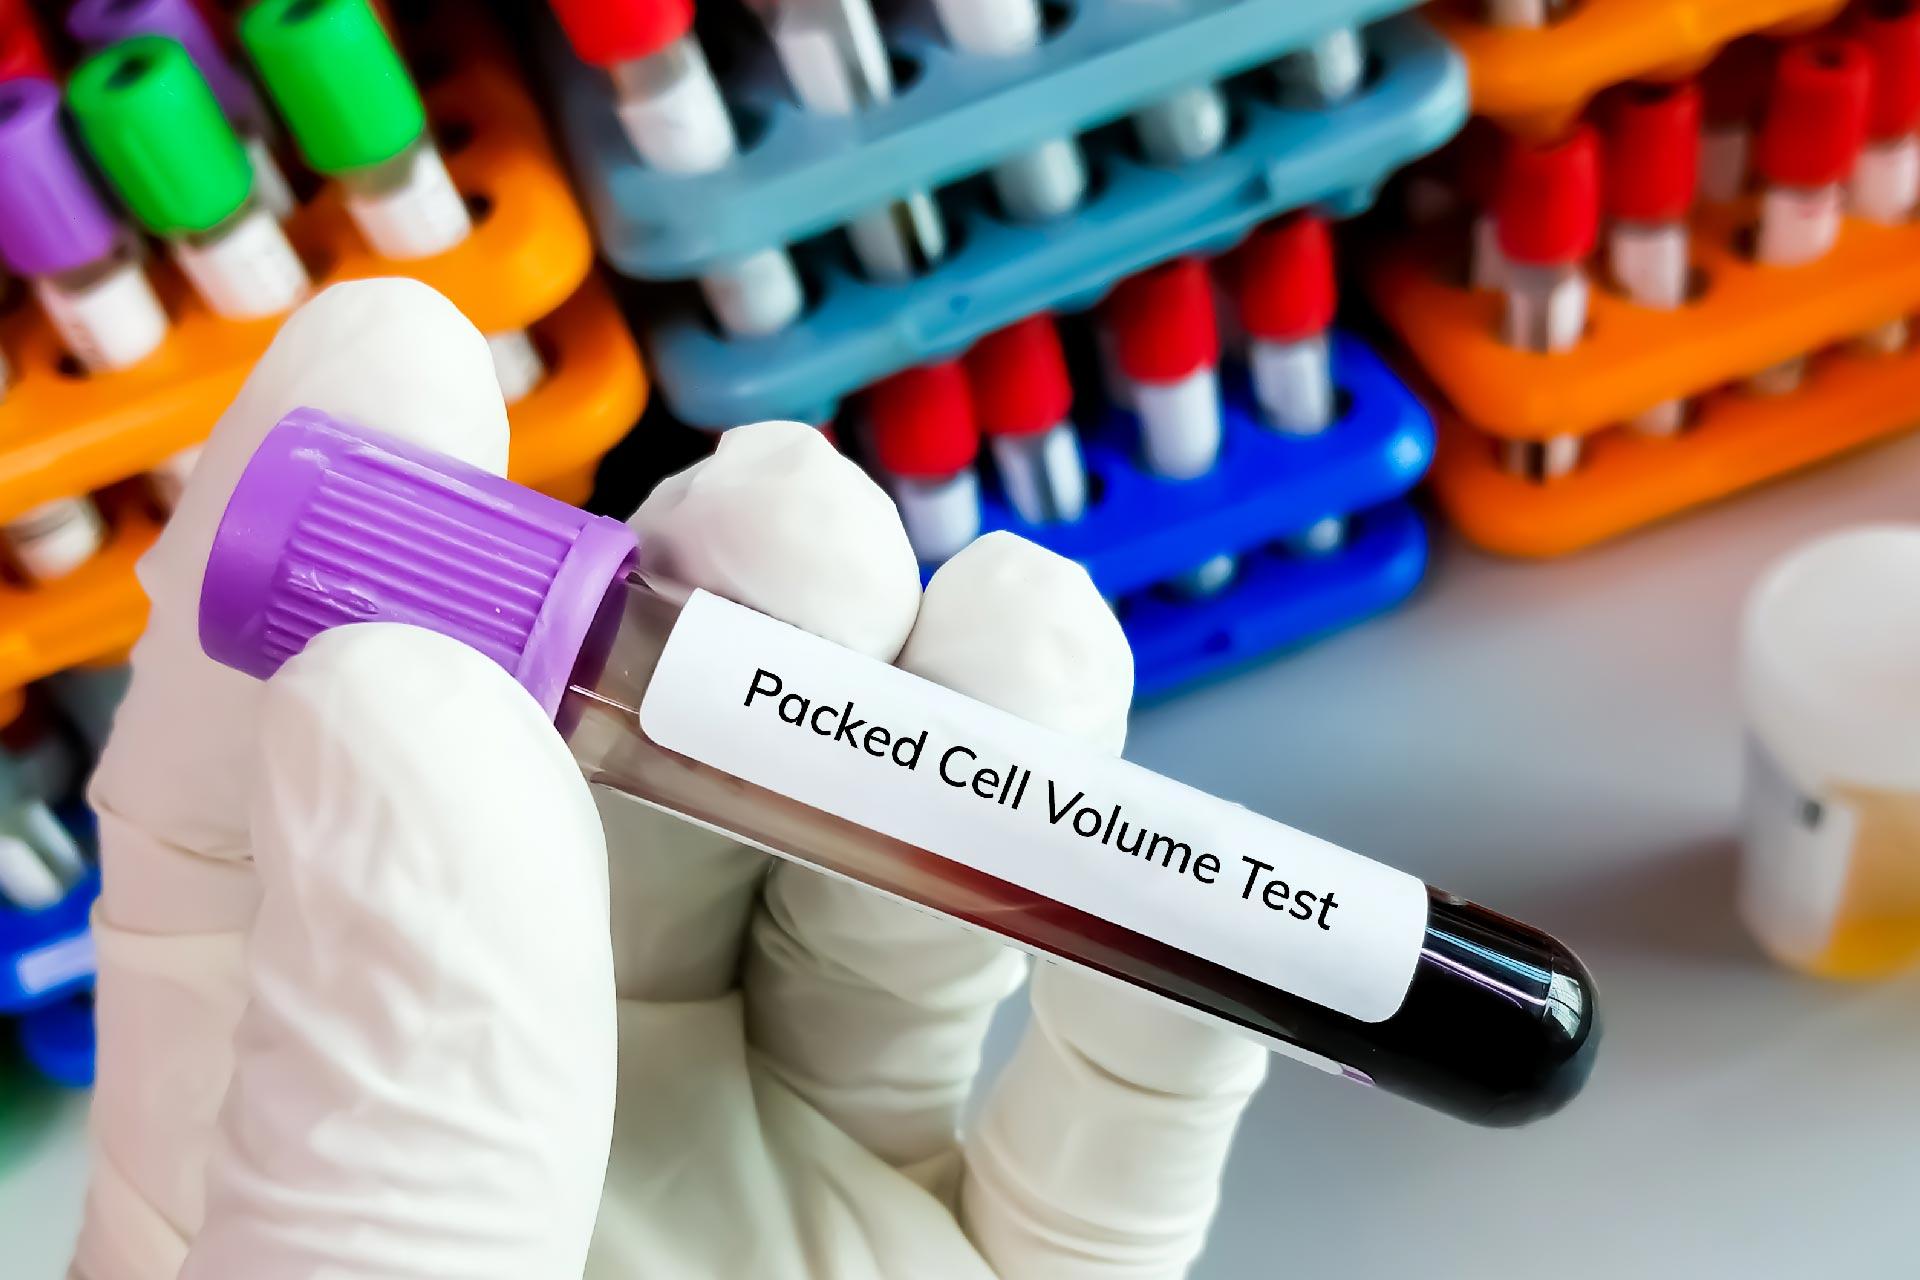 PCV(Packed Cell Volume) Test Normal Range: A Detailed Guide